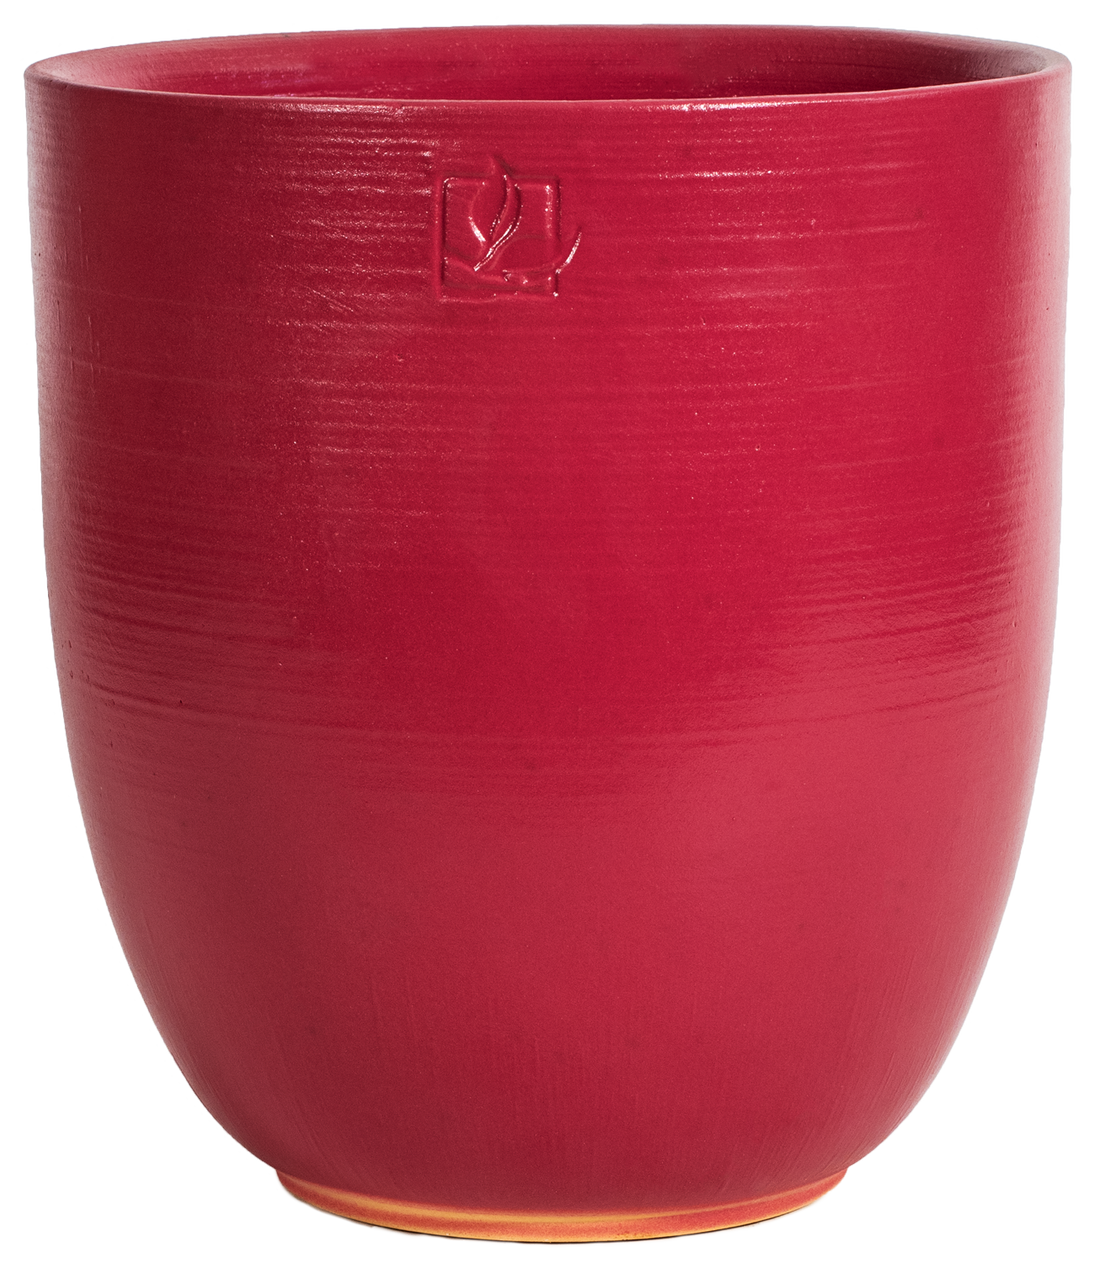 tall rounded red ceramic planter with a leaf stamp